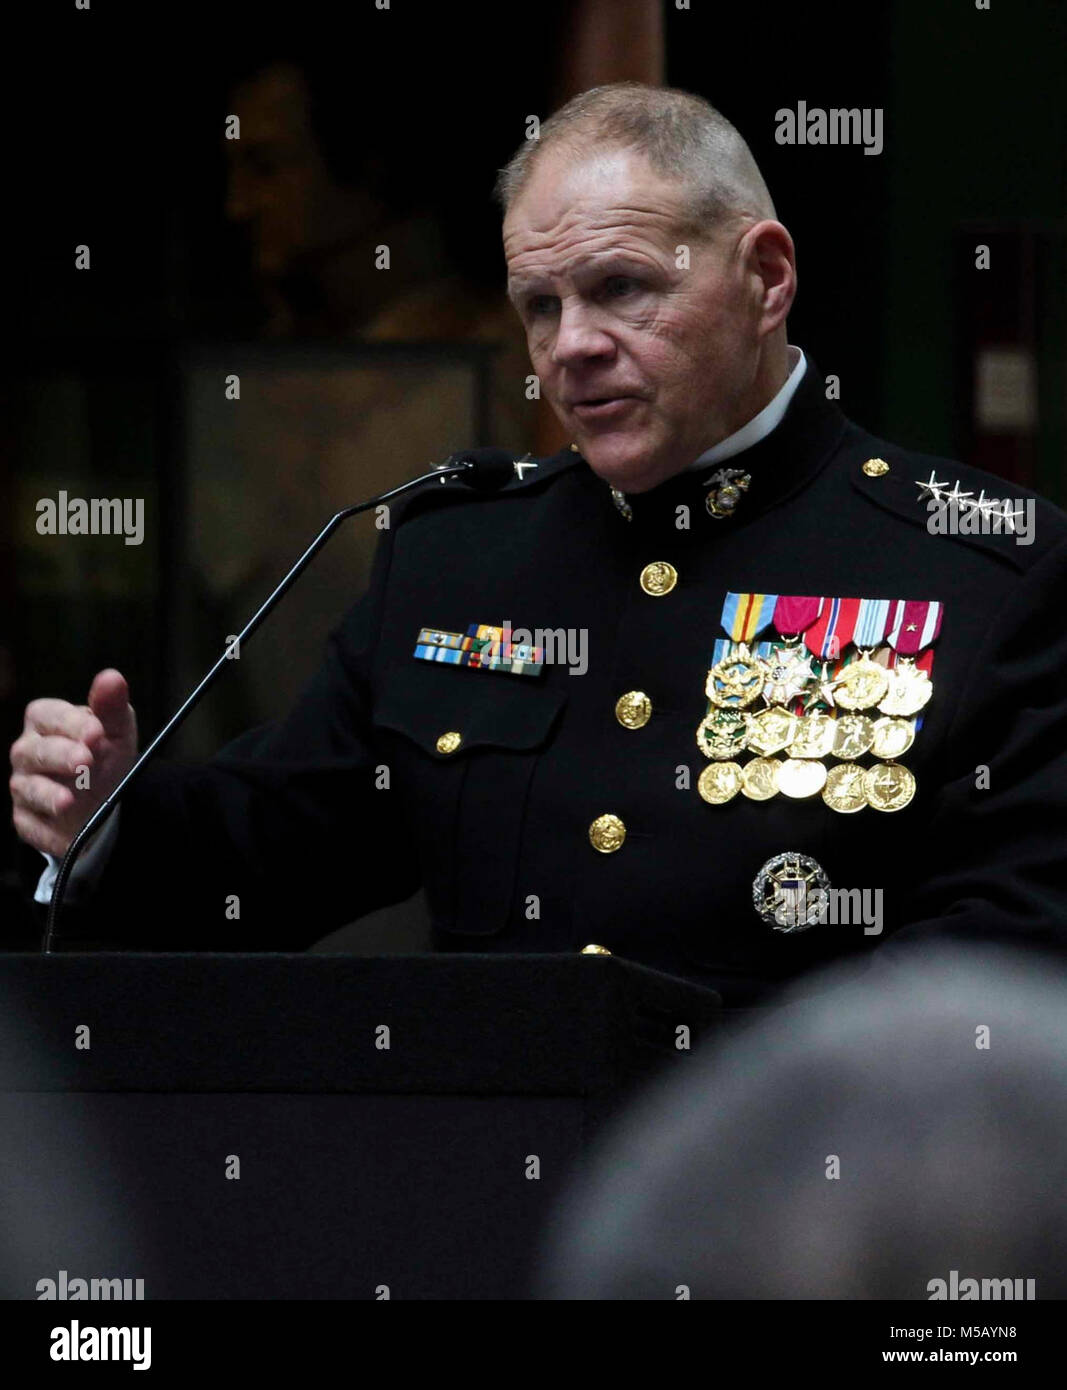 Commandant of the Marine Corps Gen. Robert B. Neller speaks to military service members and attendees during Prairie View A&M University Naval Reserve Officers Training Corps (NROTC) 50th Anniversary, Washington Navy Yard, Washington, D.C., February 14, 2018. The event was to honor the 50th anniversary of the first NROTC at a historically black college, which was established at Prairie View in 1968. (U.S. Marine Corps Stock Photo